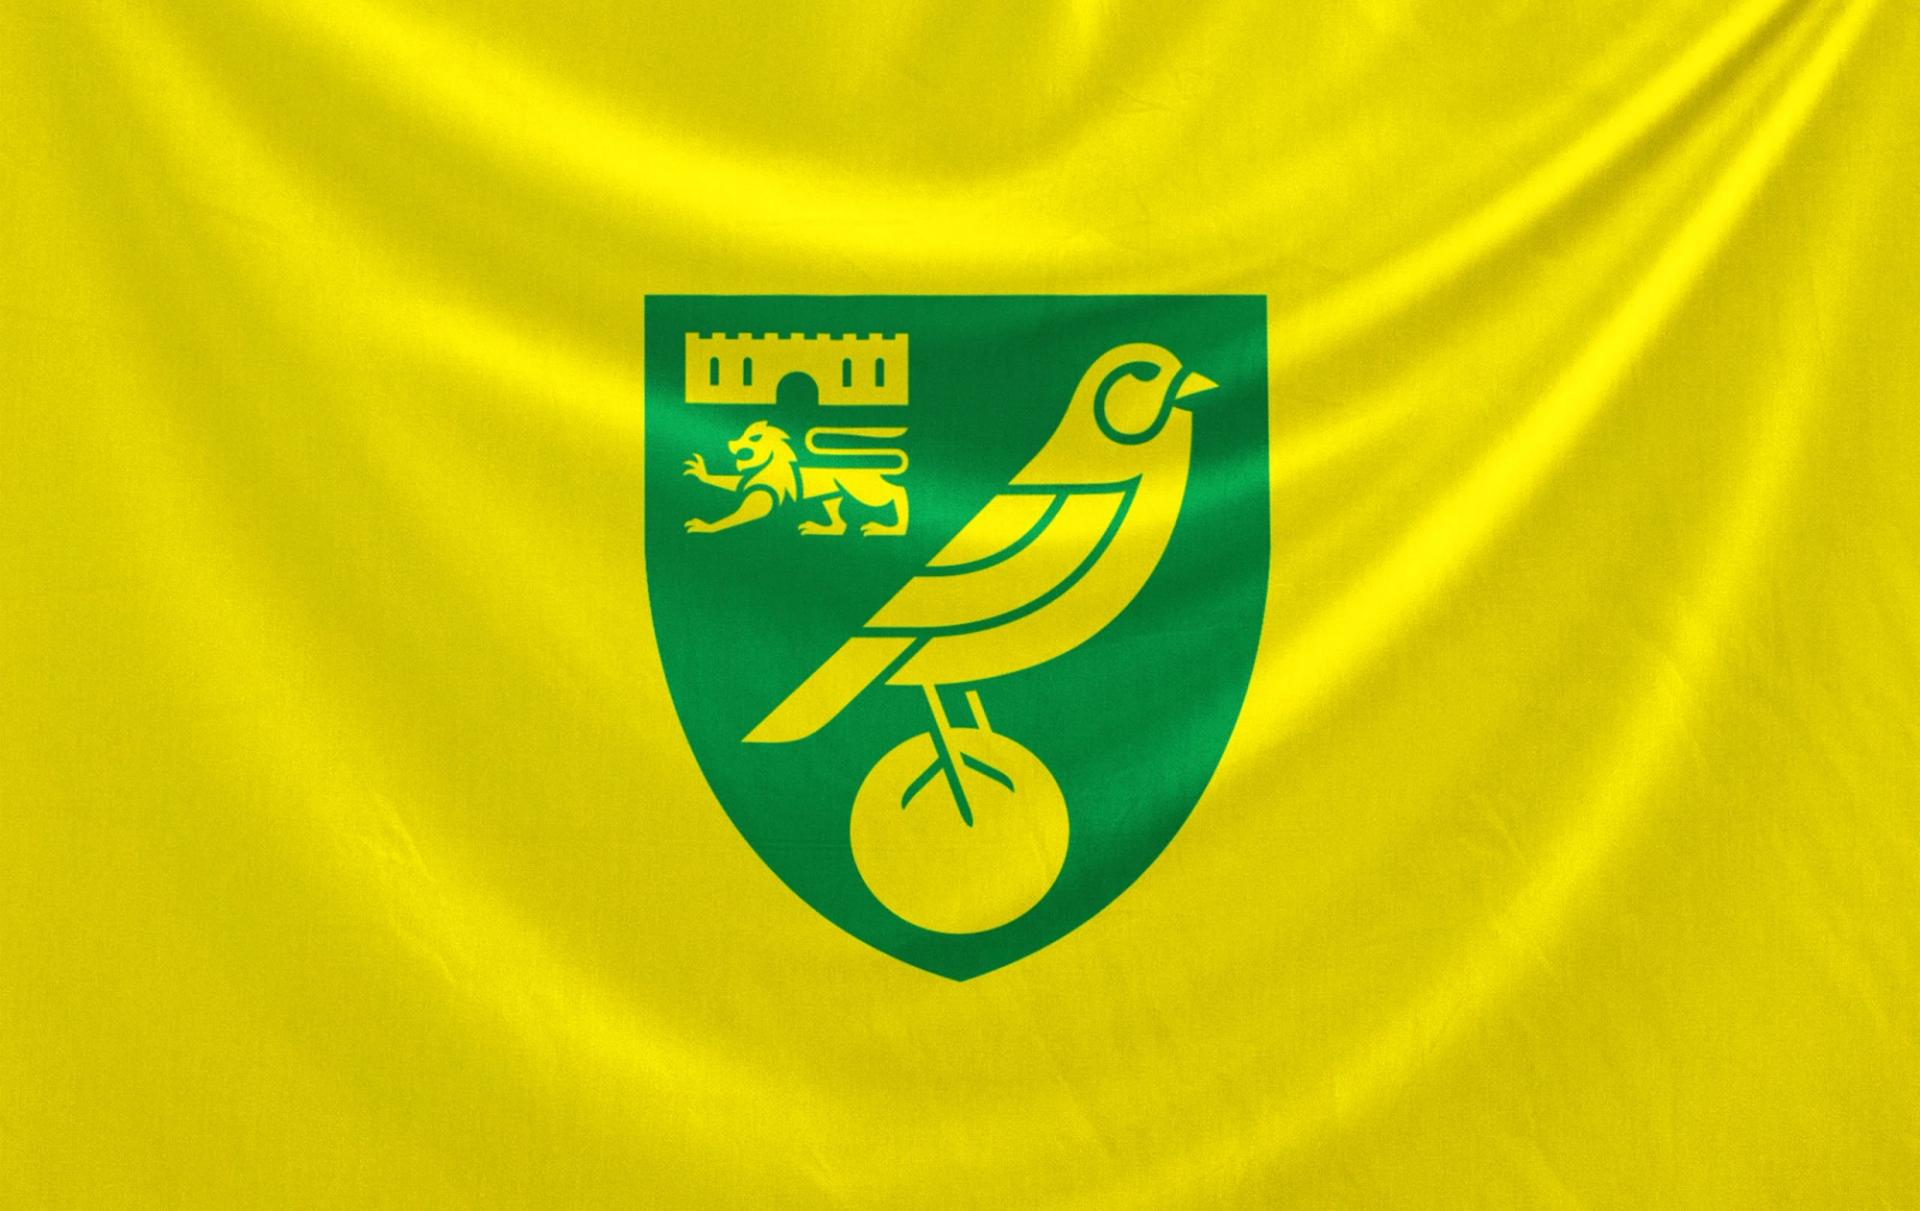 The new Norwich City Crest 